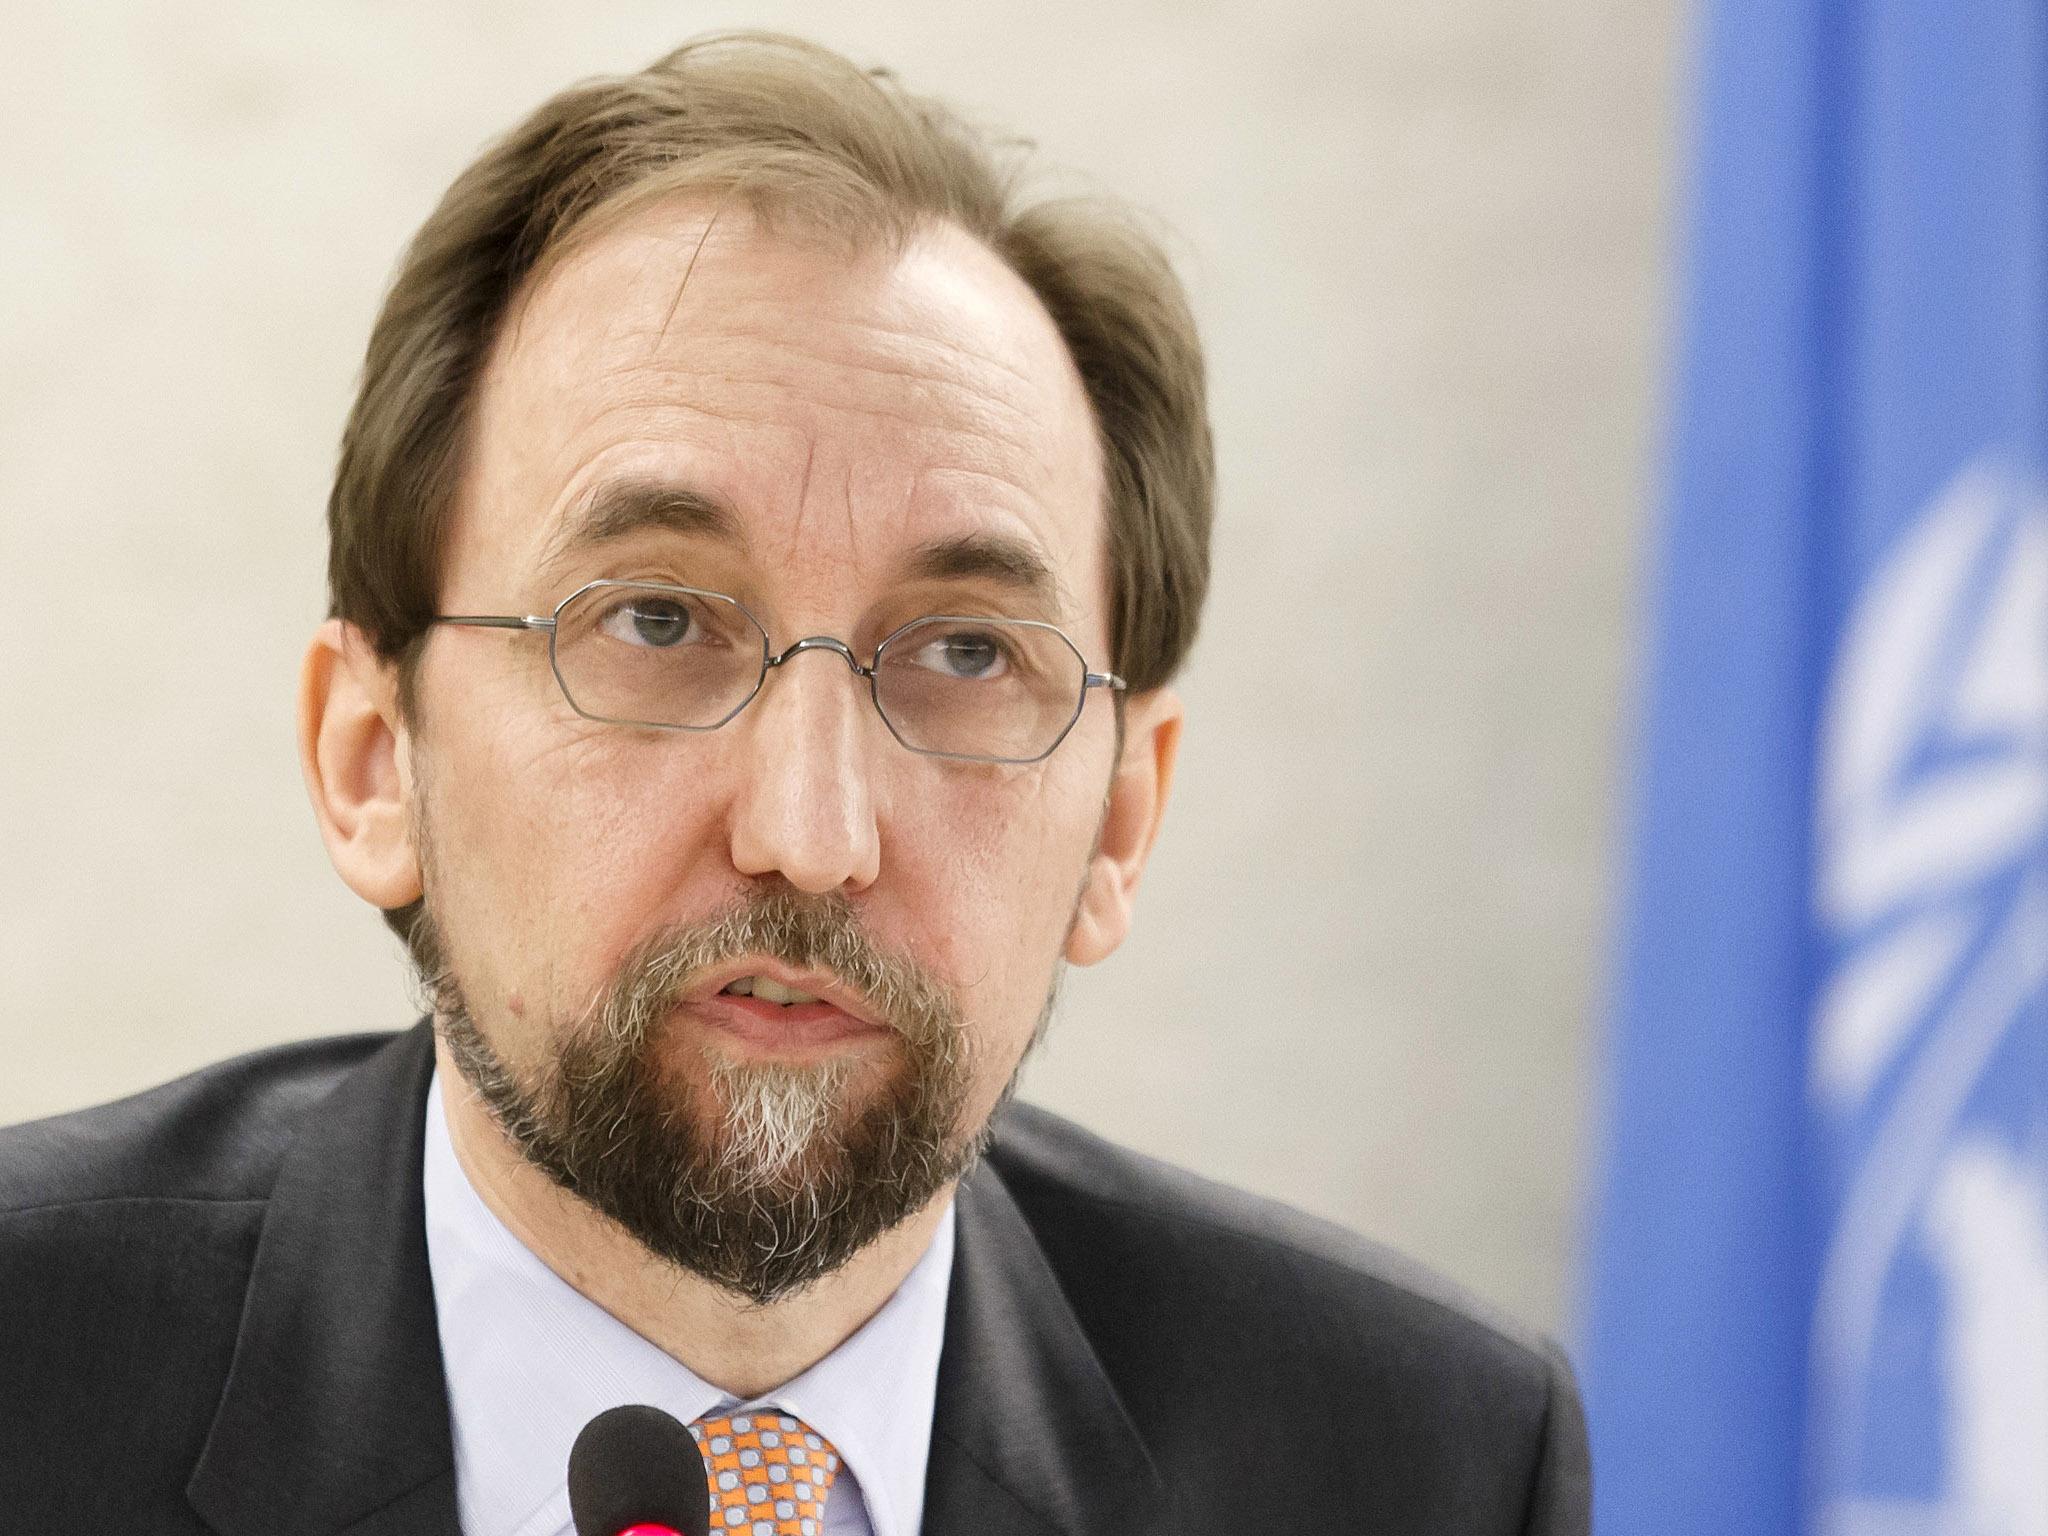 Zeid Ra'ad al-Hussein has said there were 'serious doubts' about the legitimacy of the executions which needed answering